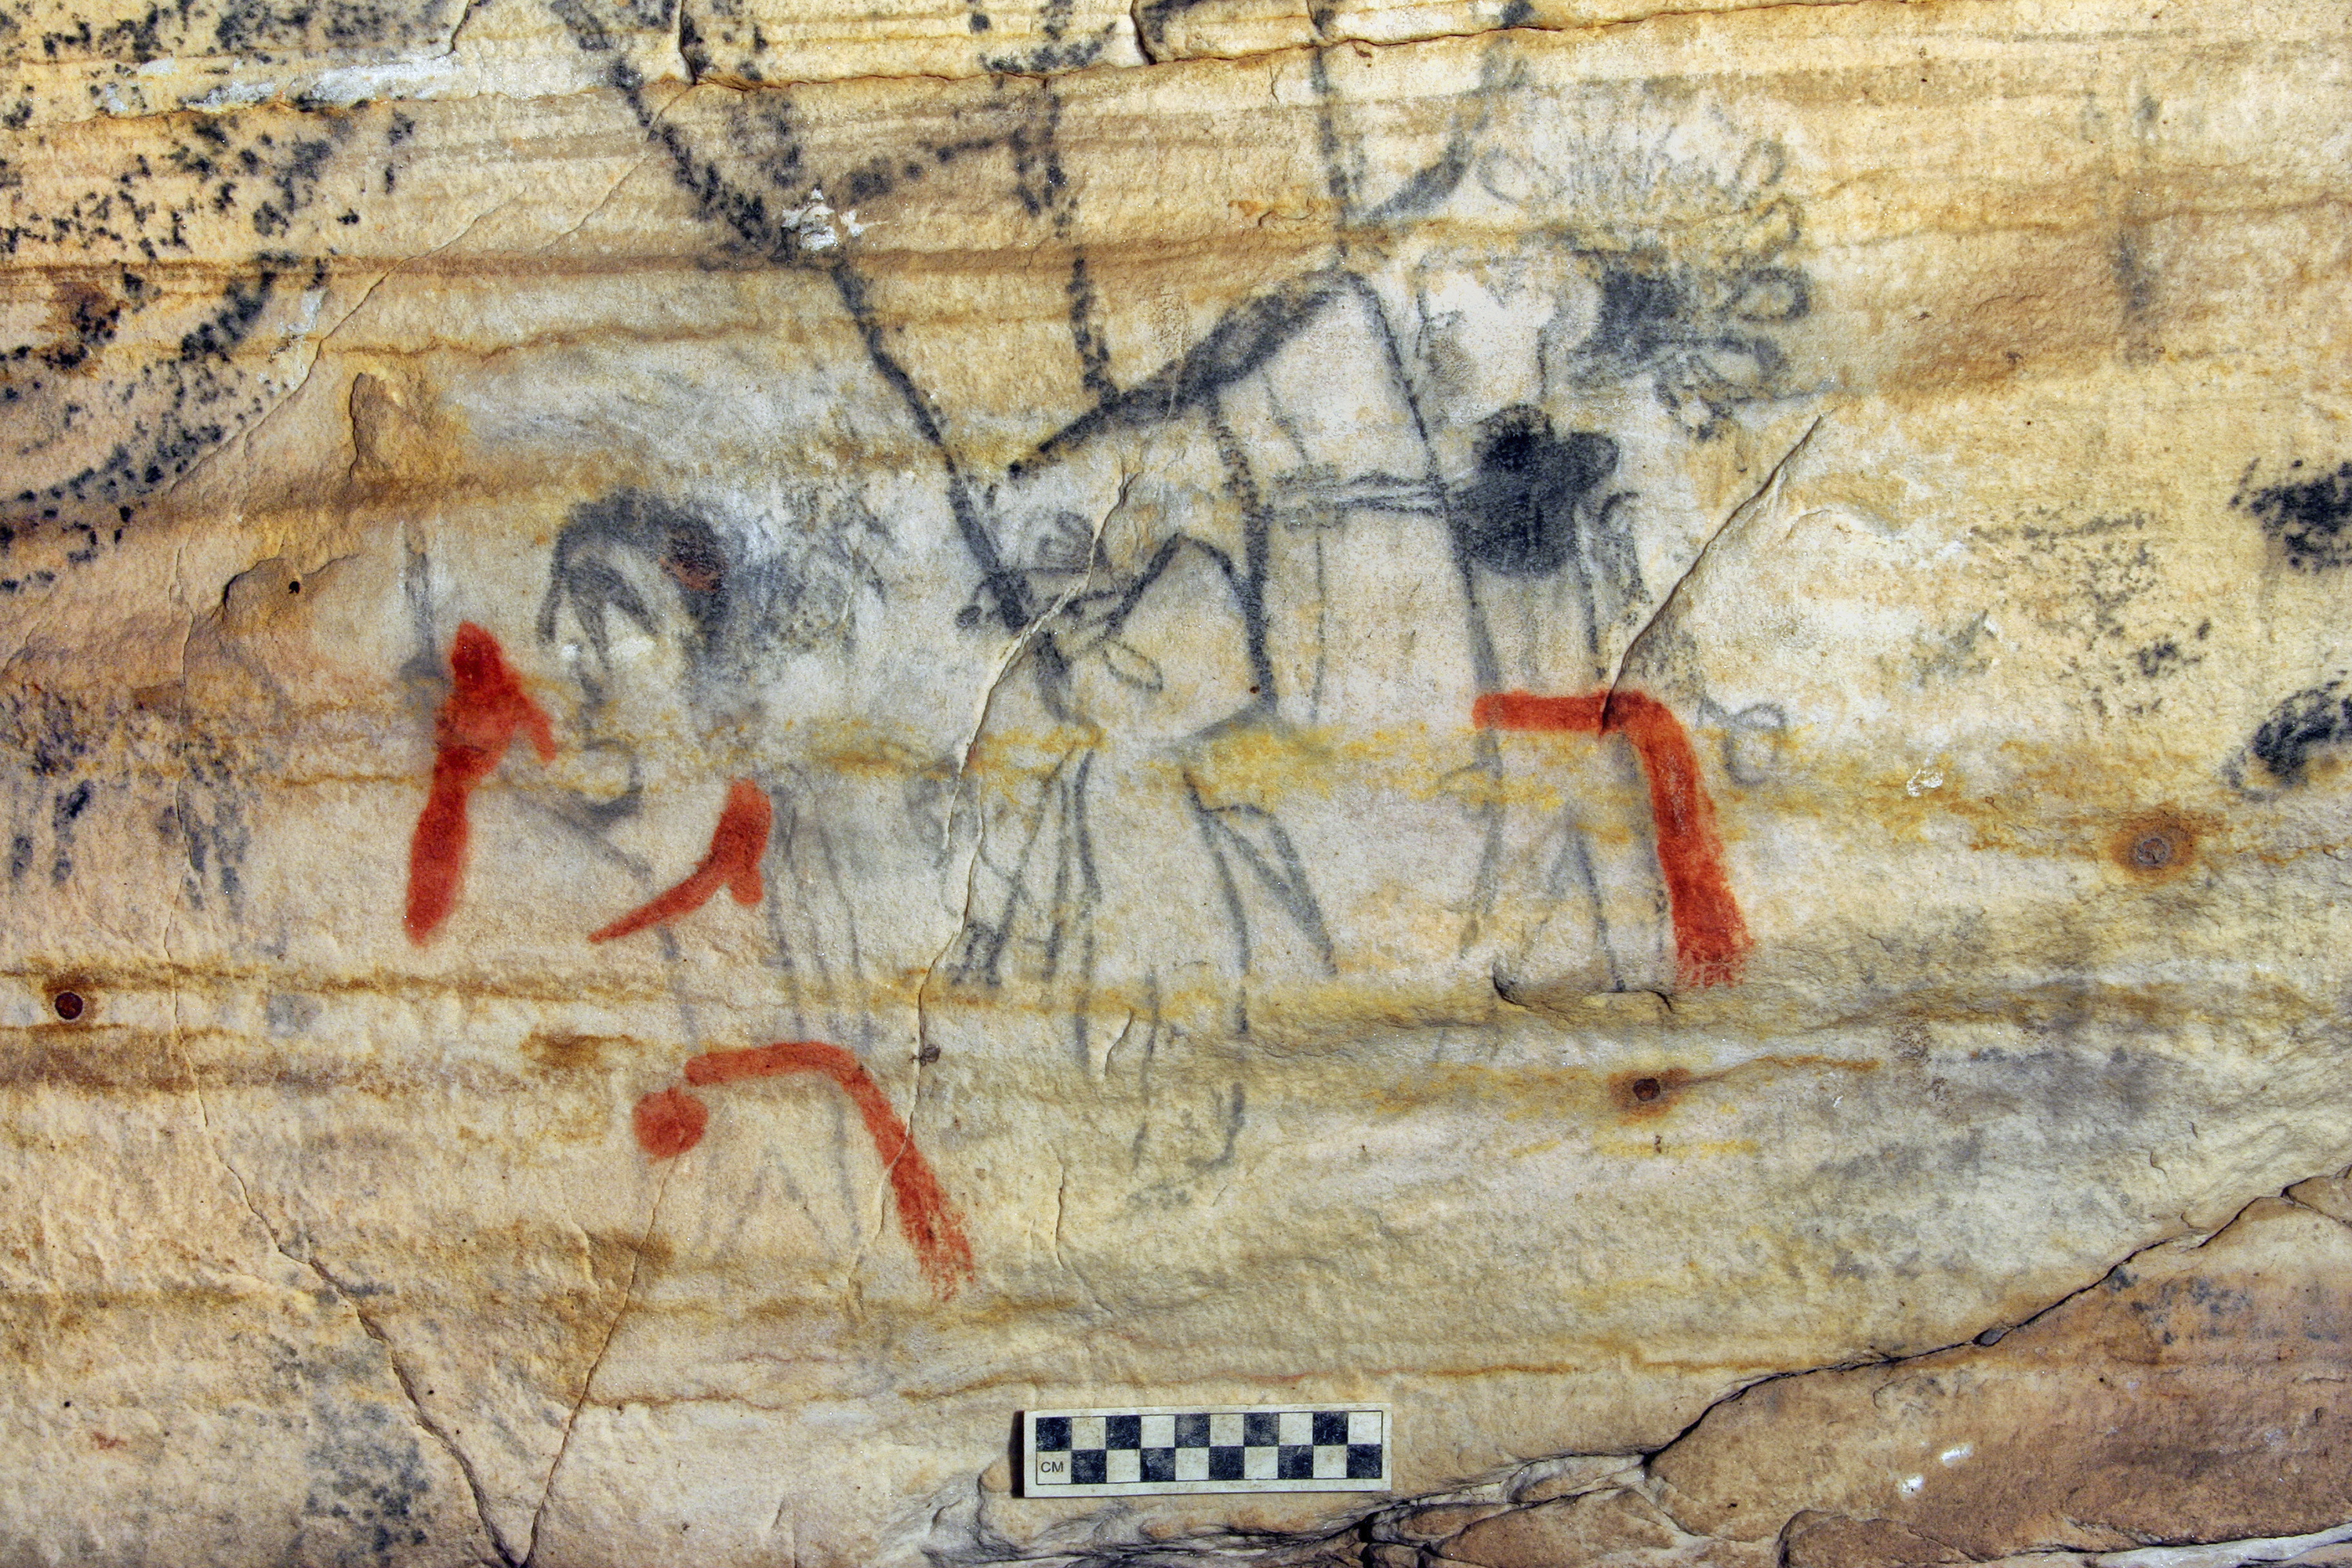 This photo shows a Missouri cave featuring artwork from the Osage Nation that’s more than 1,000 years old. The cave was sold at auction. The art inside “Picture Cave” shows humans, animals and mythical creatures. Experts who have studied the cave were concerned about the auction, but the director of the auction company says protections are in place to prohibit the new buyer from exploiting the cave, including a Missouri law that makes doing so a crime.